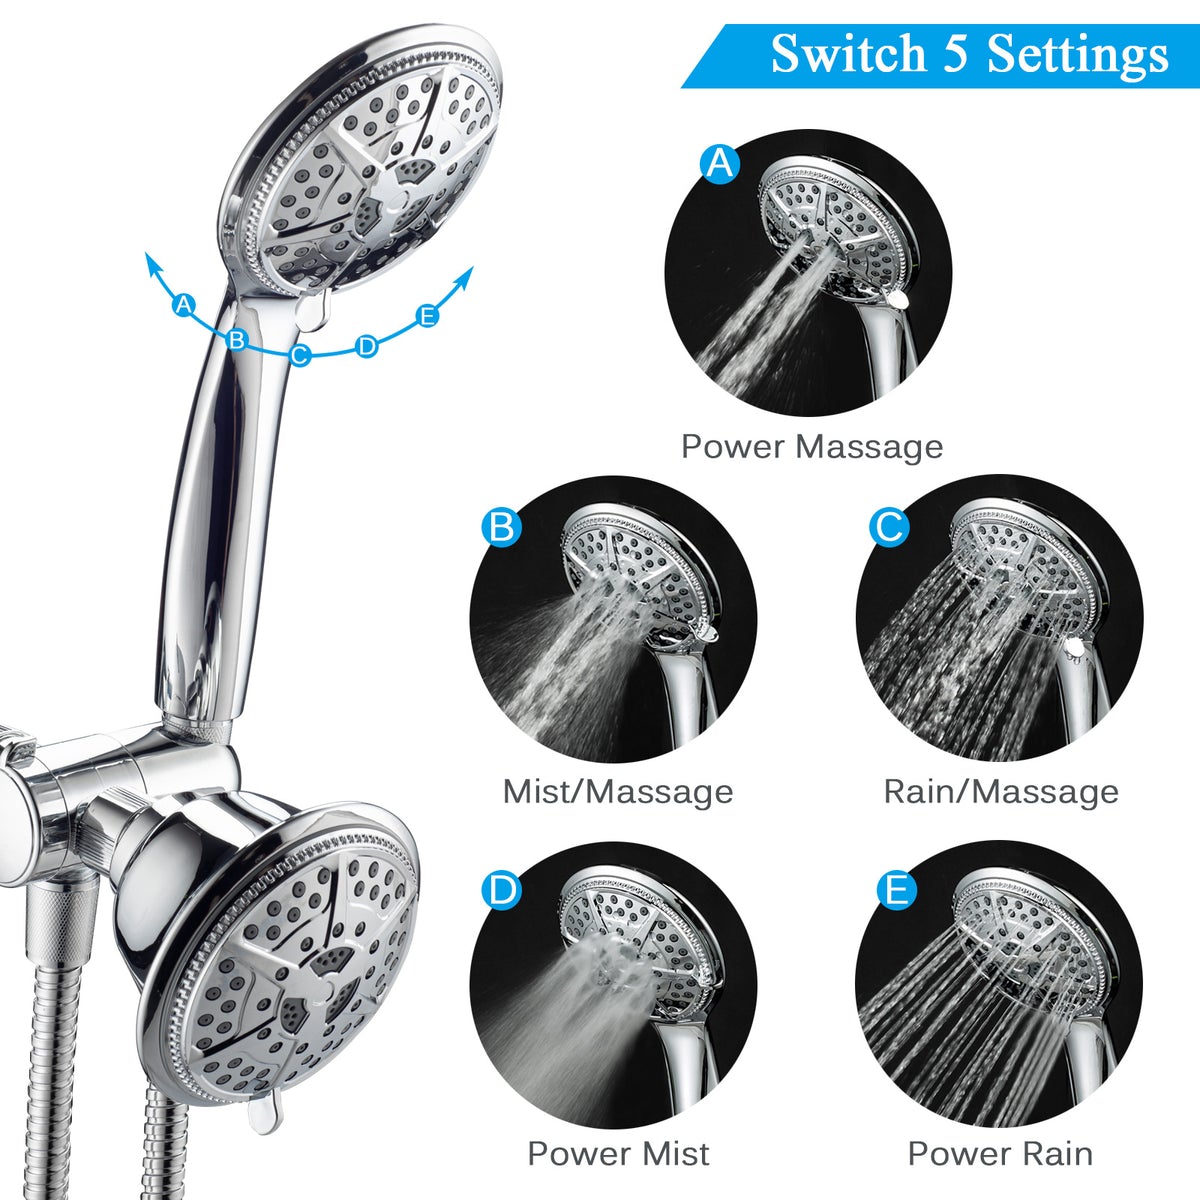 Ukoke USH01S 3 way shower head, 2 in 1 handheld Shower & Fixed Shower head Combo, High Pressure 24 Function Rainfall Chrome Face with Hose 2.5 GPM+$14.99